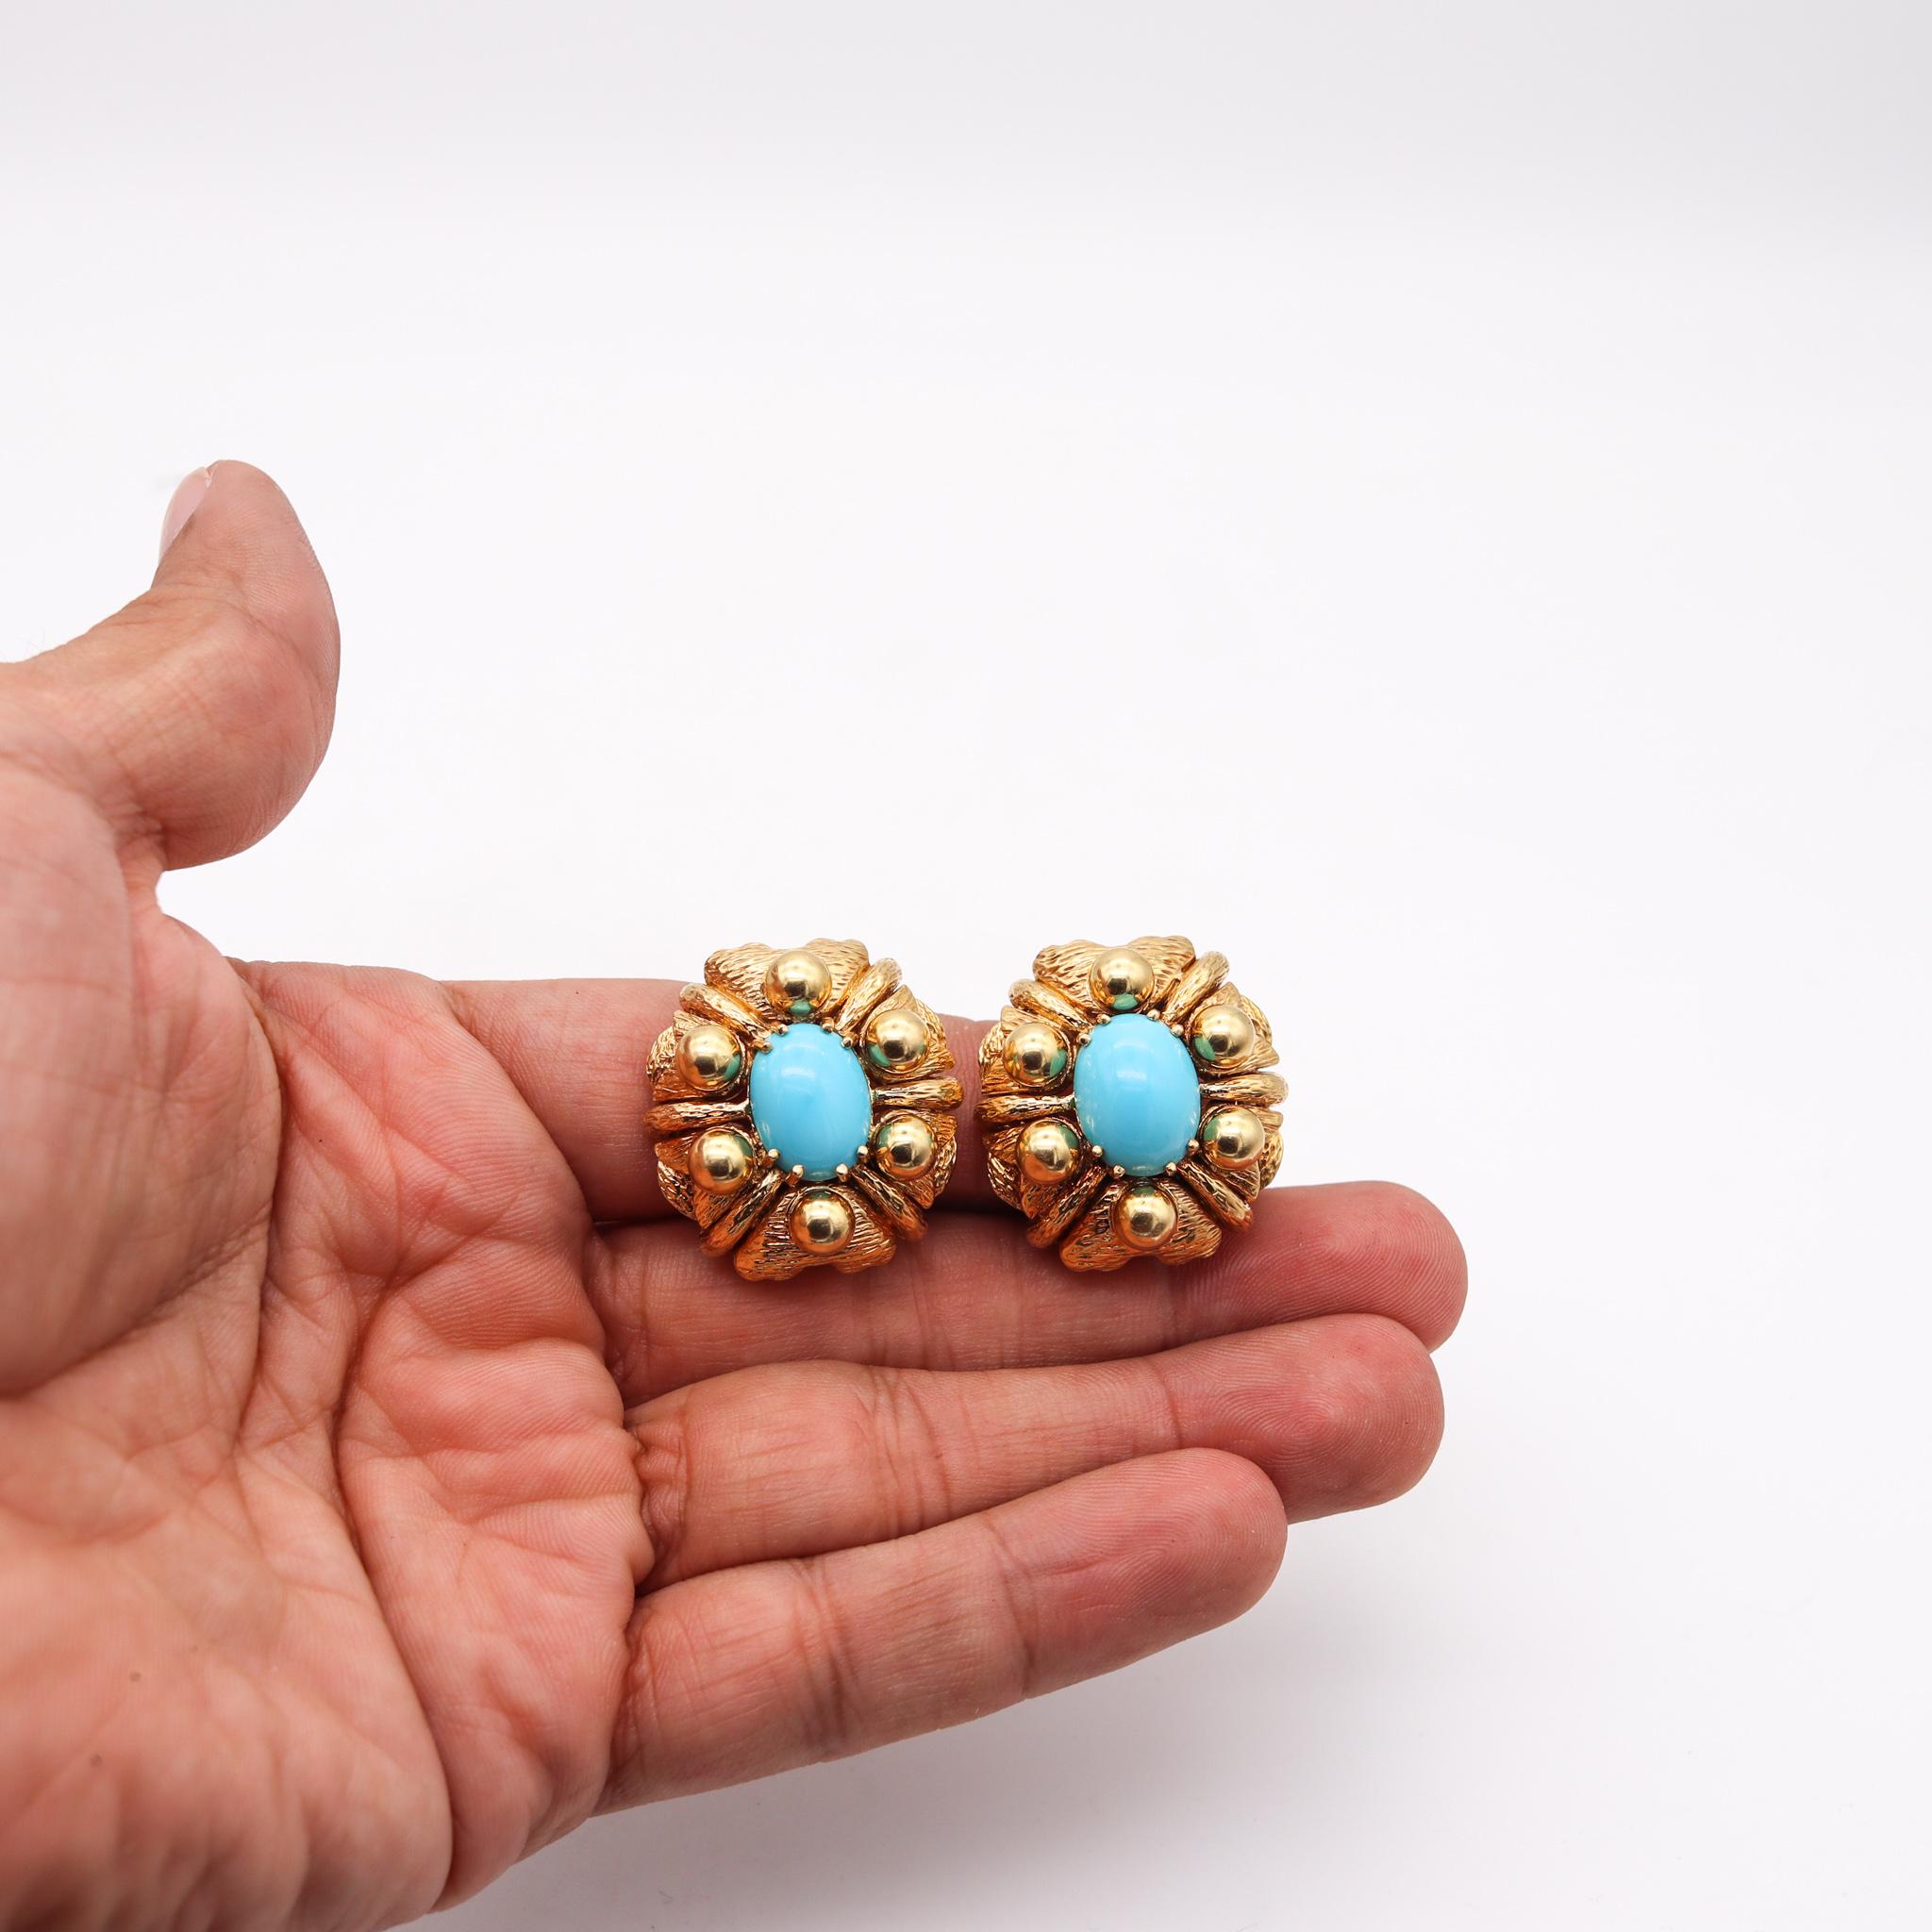 Cabochon Mid Century 1960 Cocktail Earrings In 18Kt Gold With Sleeping Beauty Turquoises